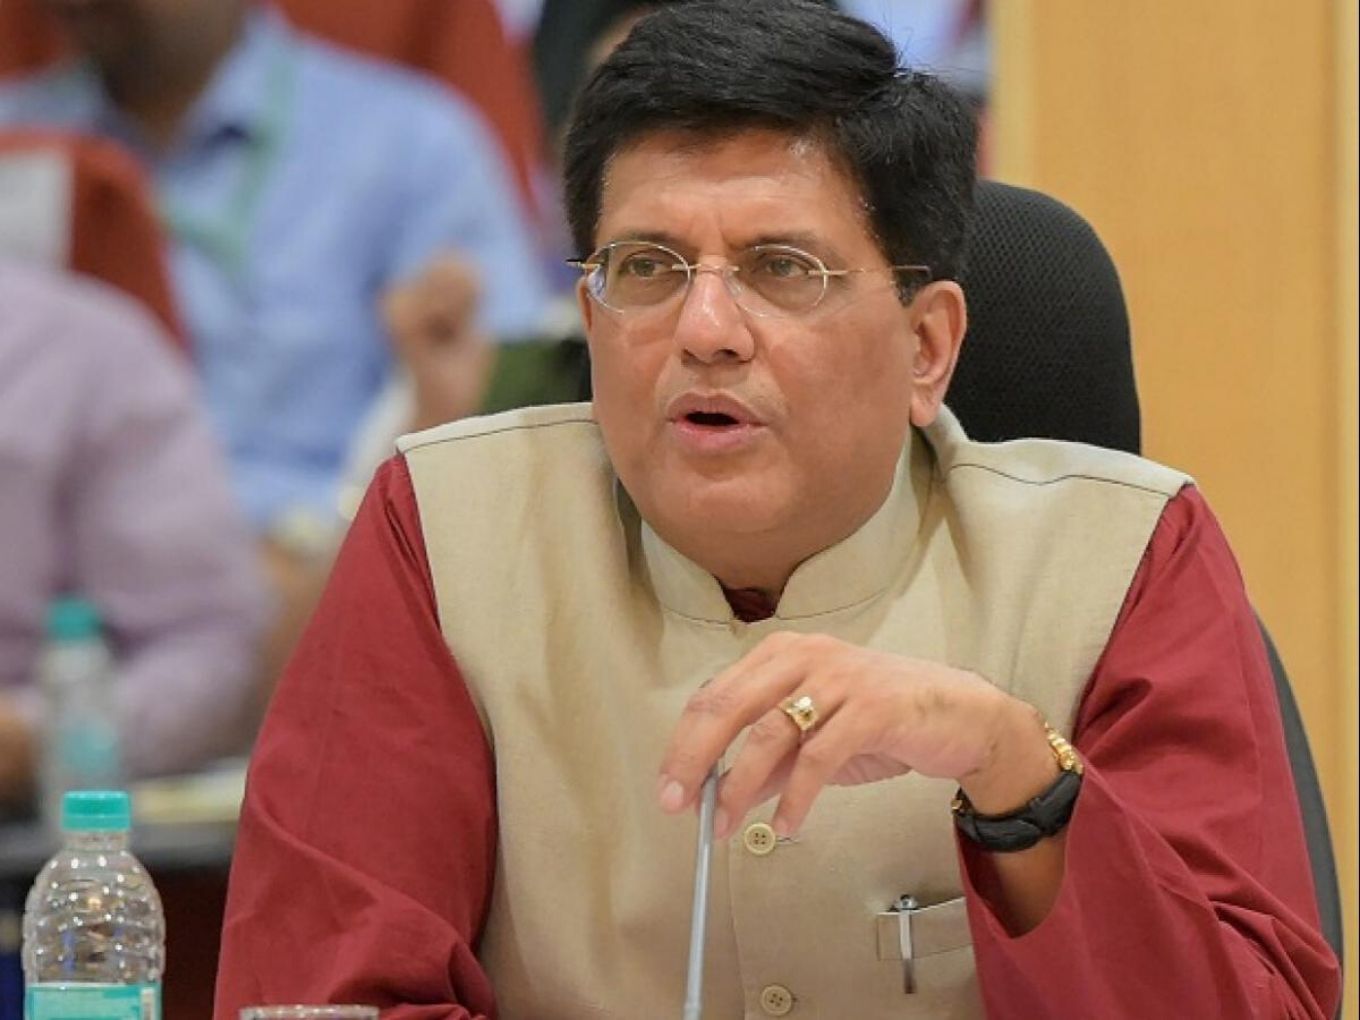 Piyush Goyal said that CCI and commerce ministry would not have to probe on ecommerce such as Amazon if it can stay within the spirit of law